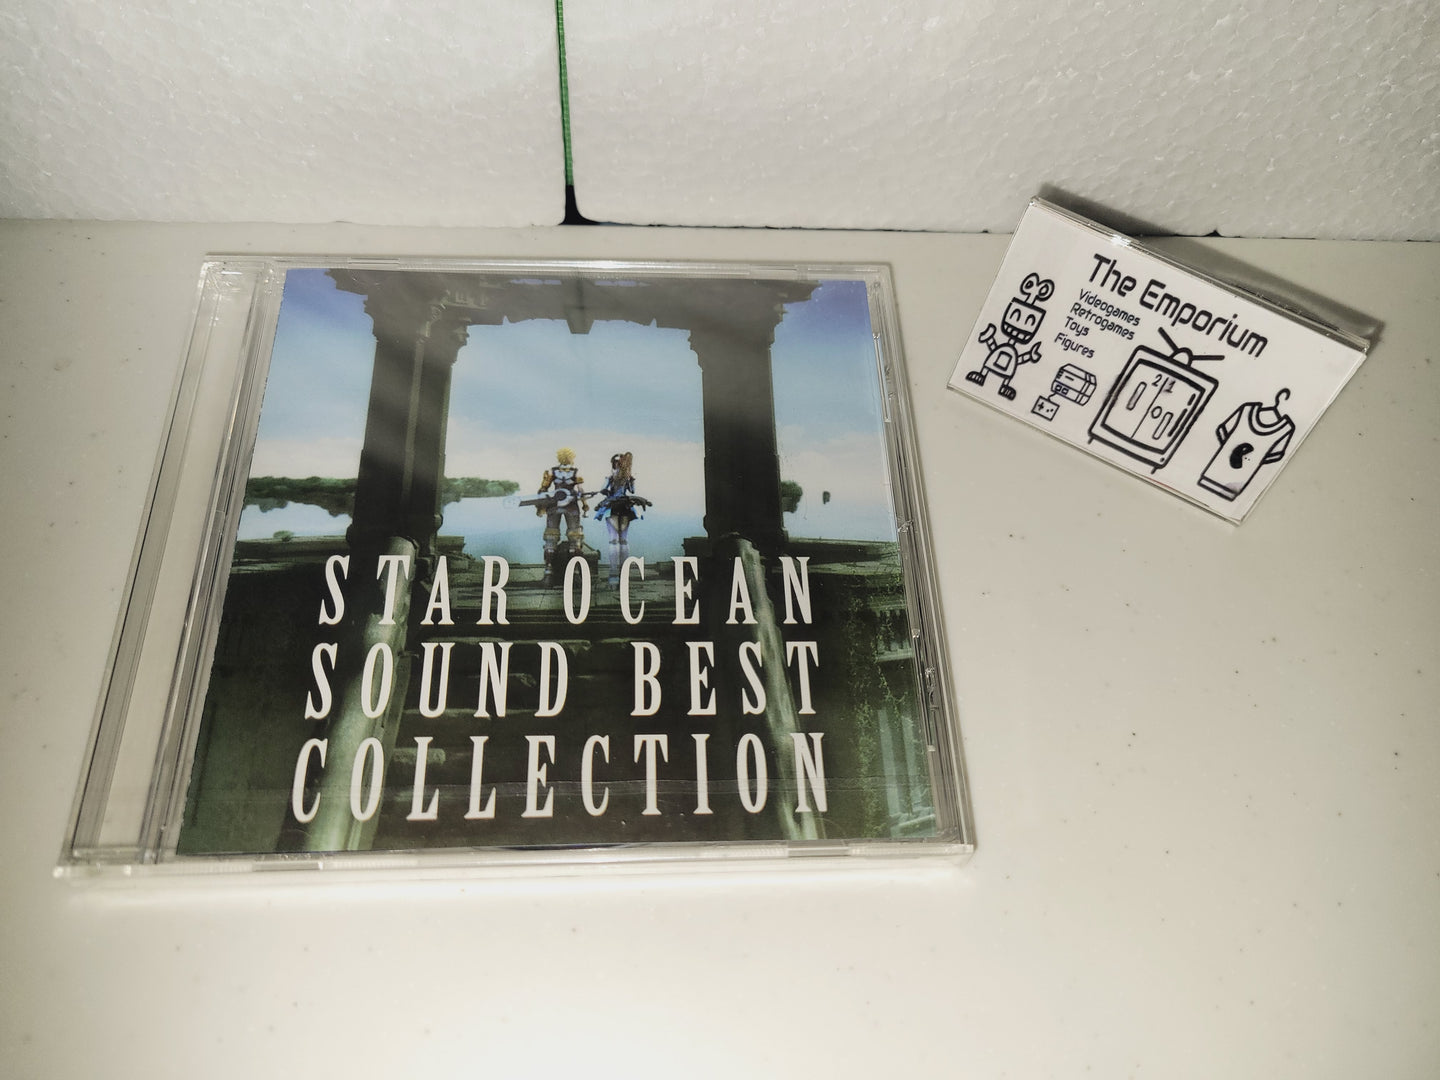 Star Ocean Sound Best Collection - Music cd soundtrack